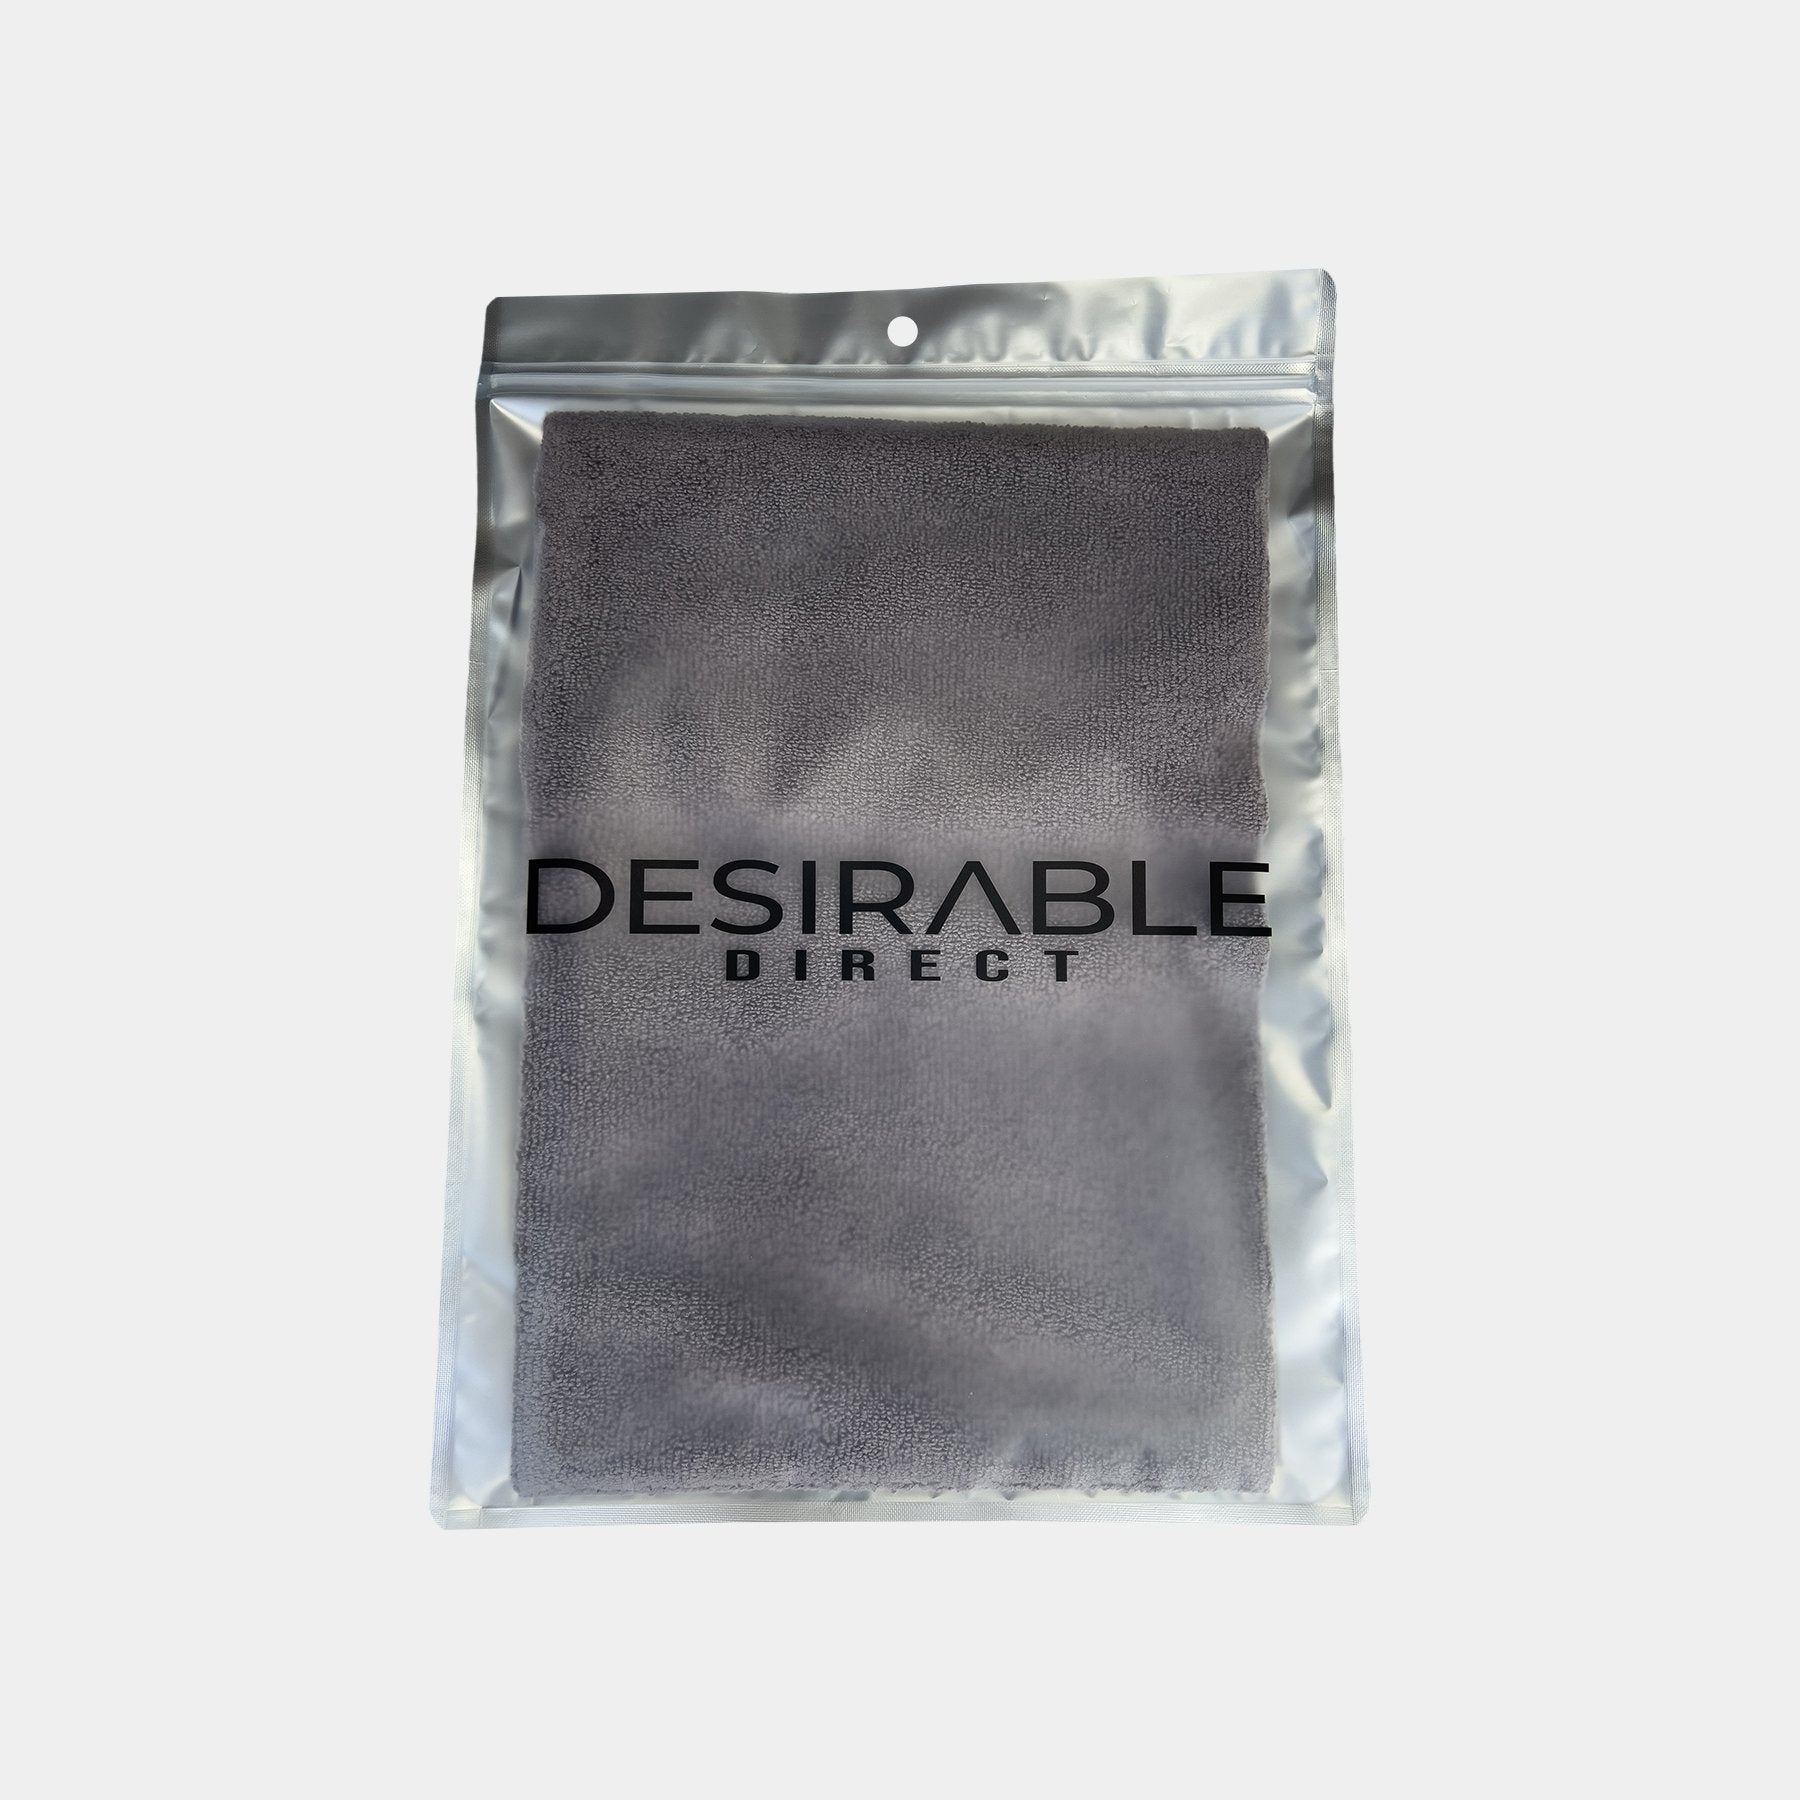 Car care microfibre grey cloth 40x40cm displayed on a white background in silver packaging with desirable direct printed on the front to keep the item clean when not in use.